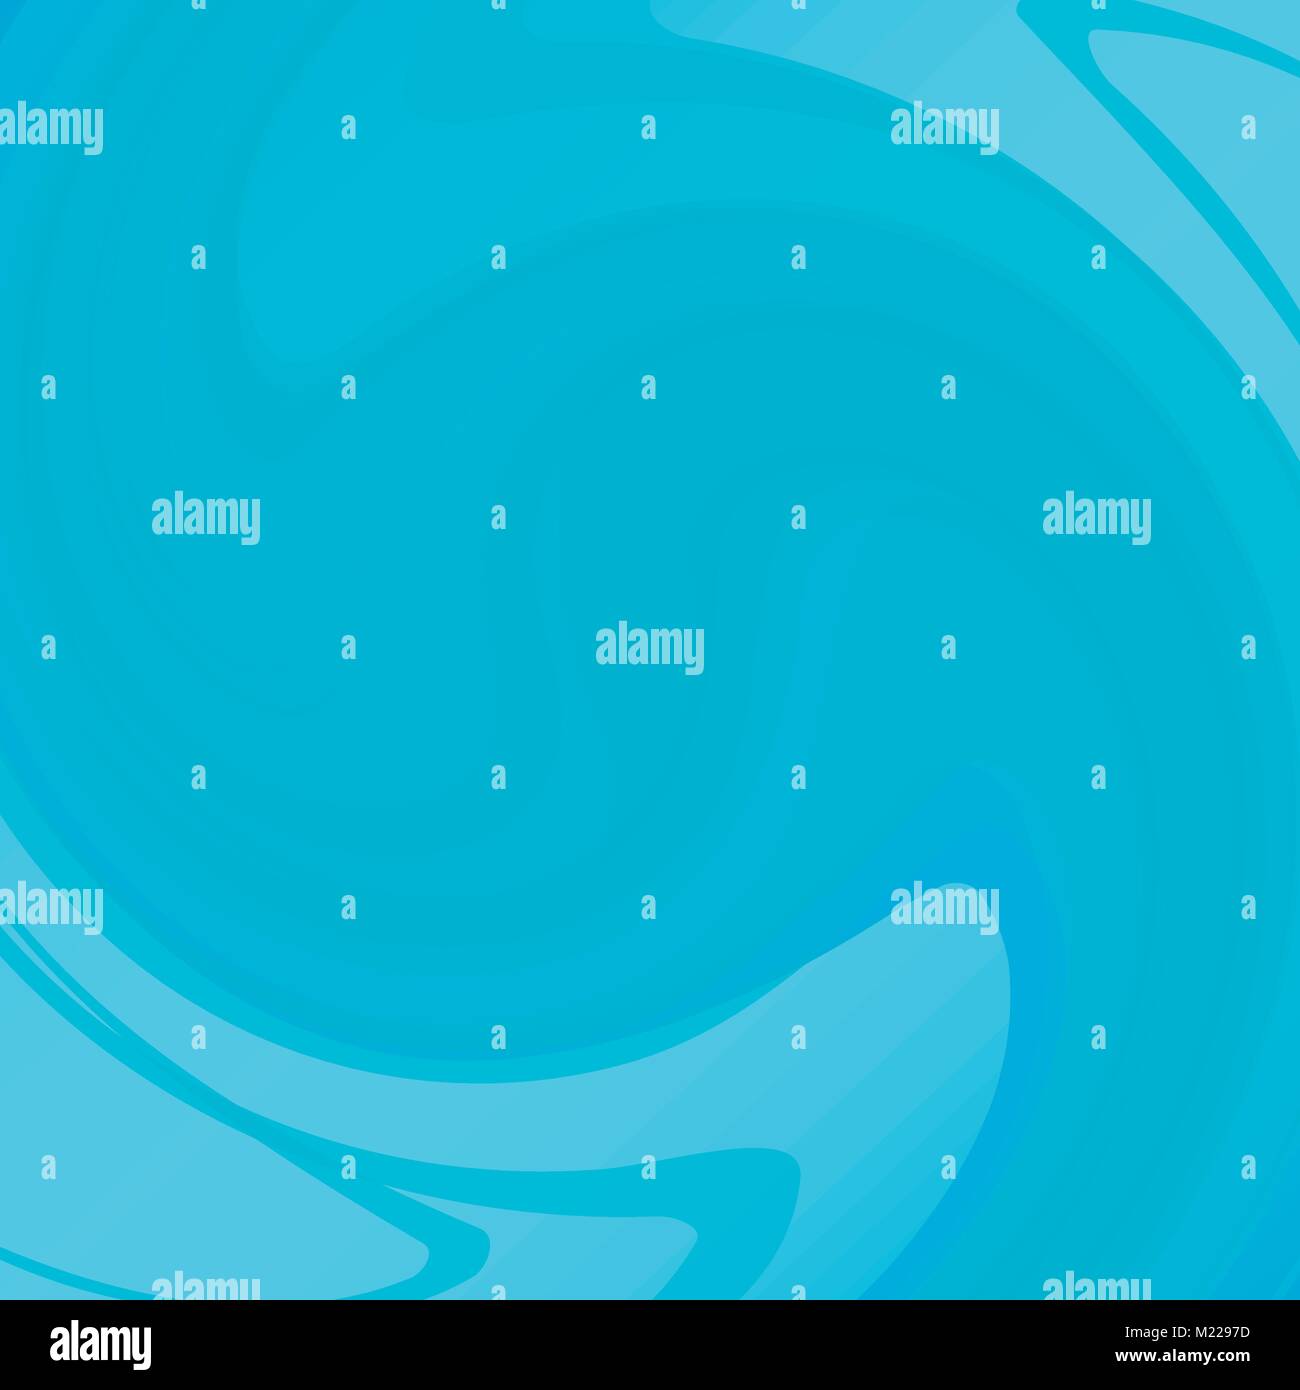 Abstract blue background of swirling lines. Stock Vector